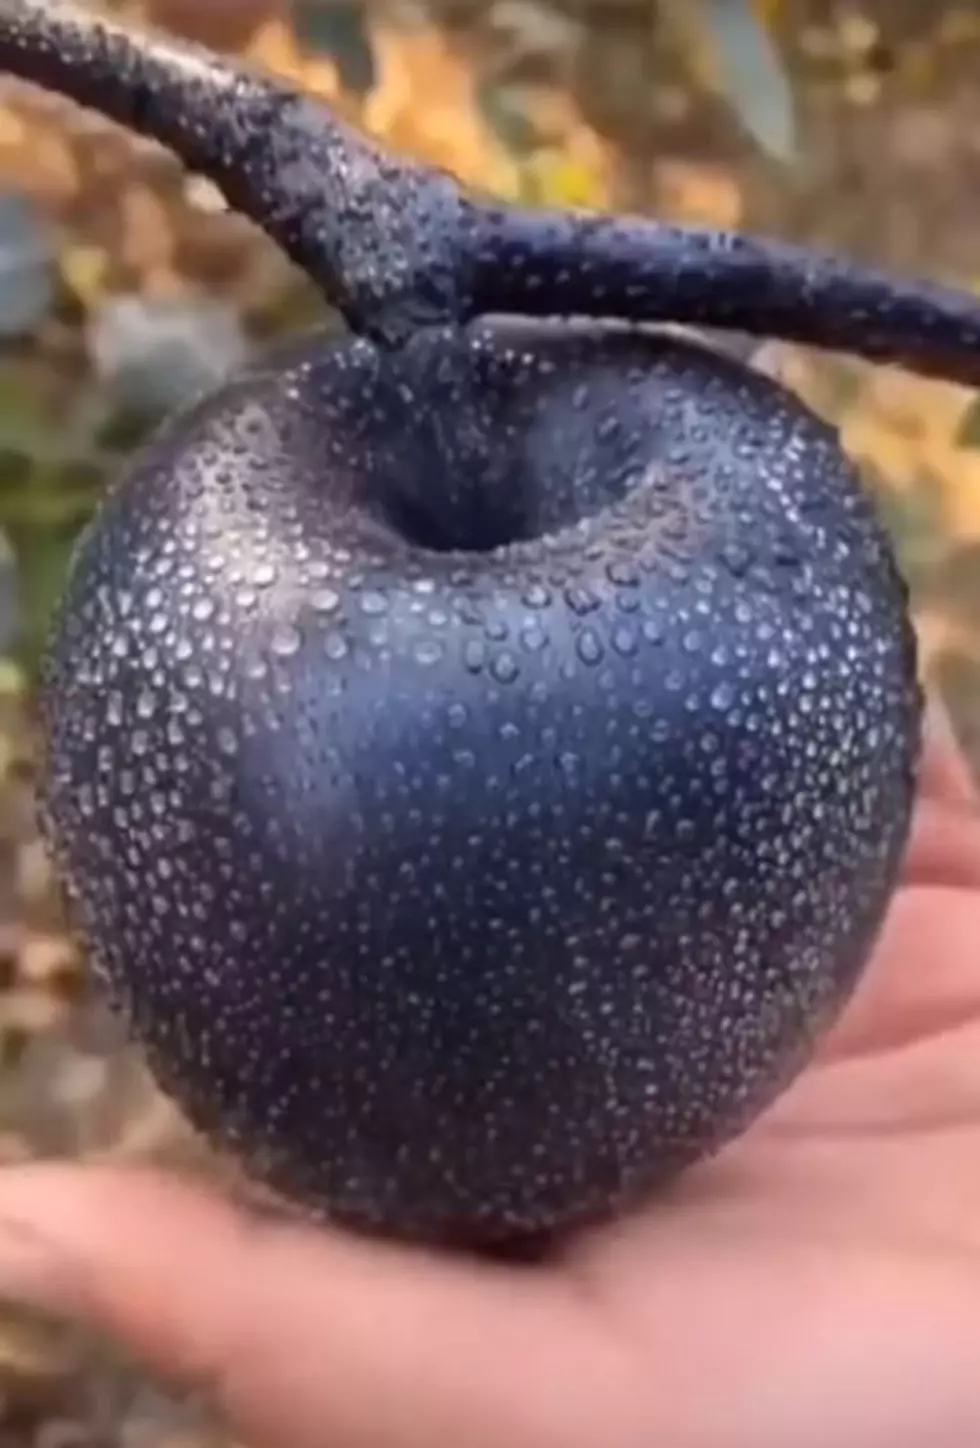 Have You Heard Arkansas is Home to the Rare Black Apple?